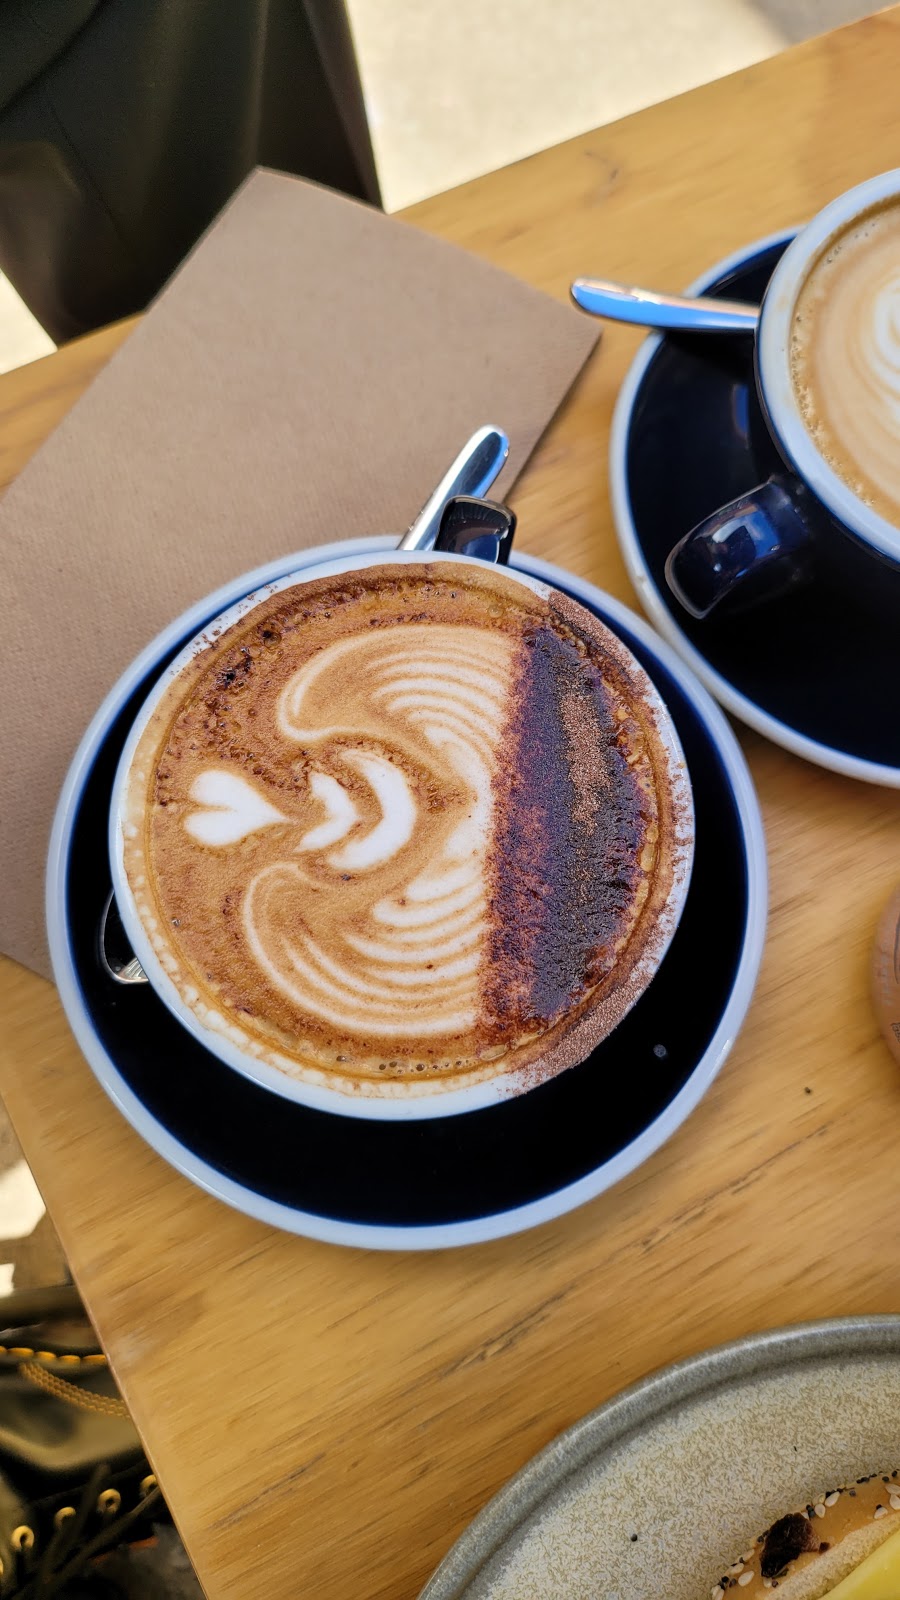 Migrant Coffee | cafe | 3/576 Barkly St, West Footscray VIC 3012, Australia | 0370128809 OR +61 3 7012 8809